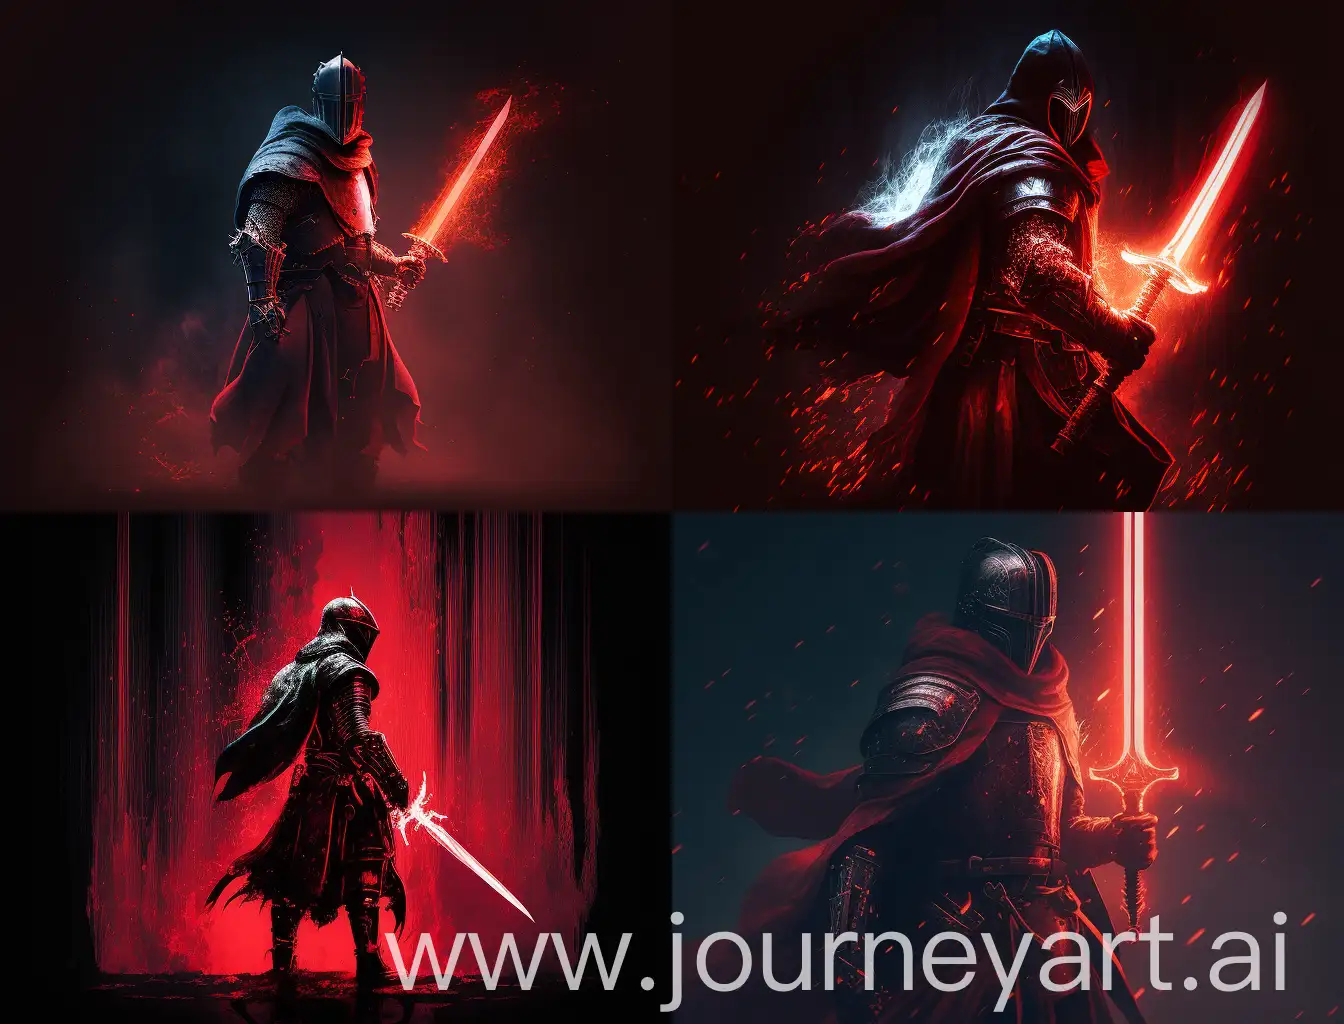 Glowing-Red-Knight-with-Crimson-Aura-in-Stormy-Cinematic-Scene